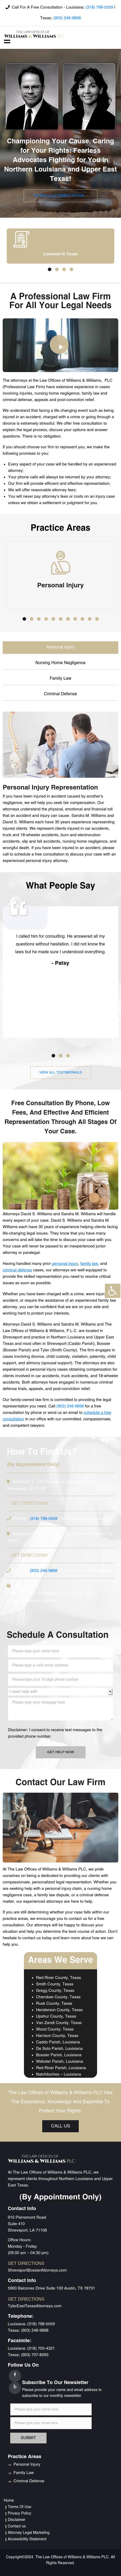 The Law Offices of Williams & Williams PLC - Shreveport LA Lawyers